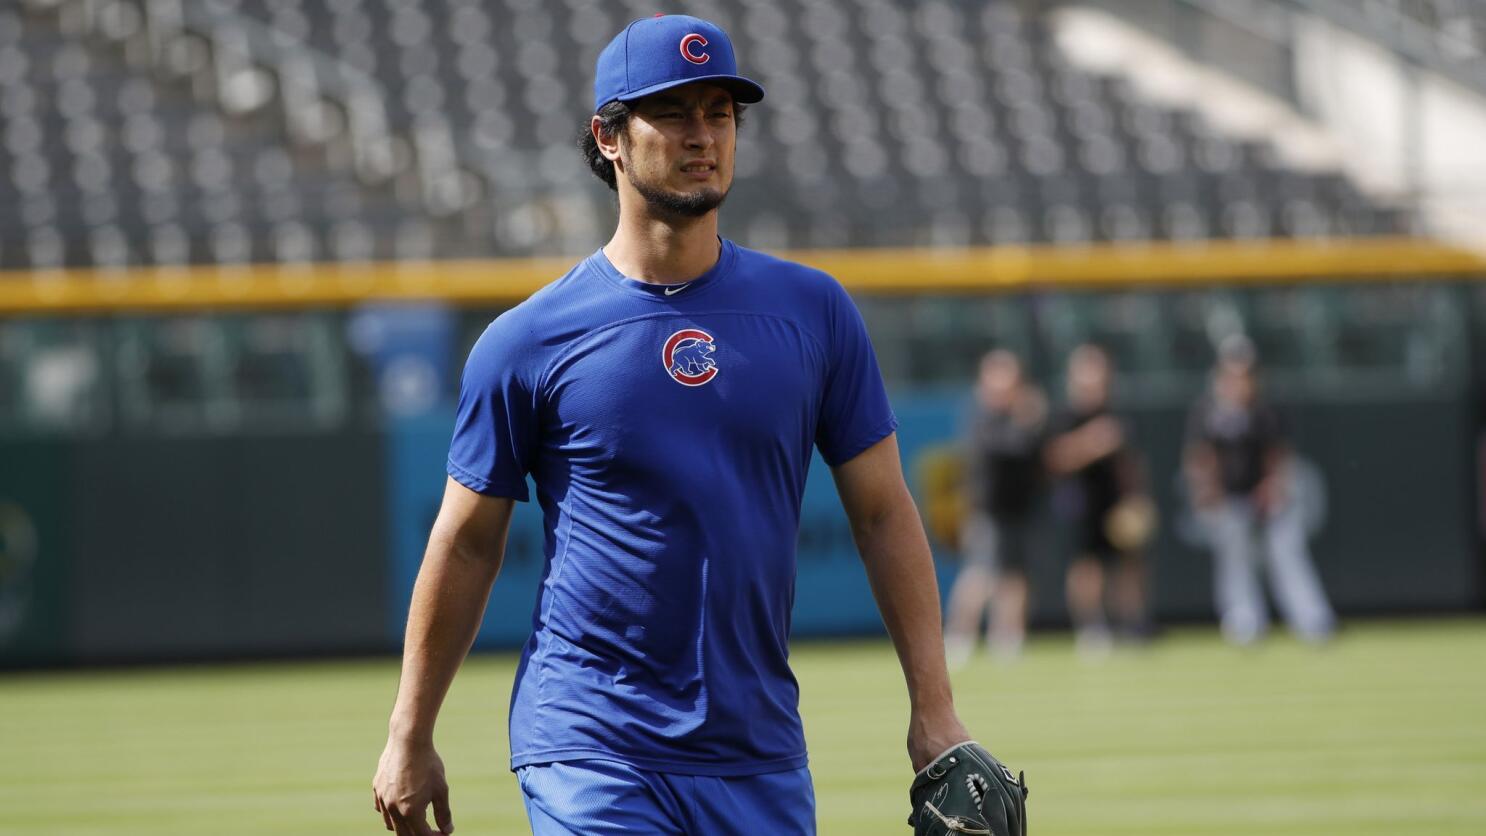 Dodgers' Yu Darvish Confounds the Cubs With a Dominant Outing and